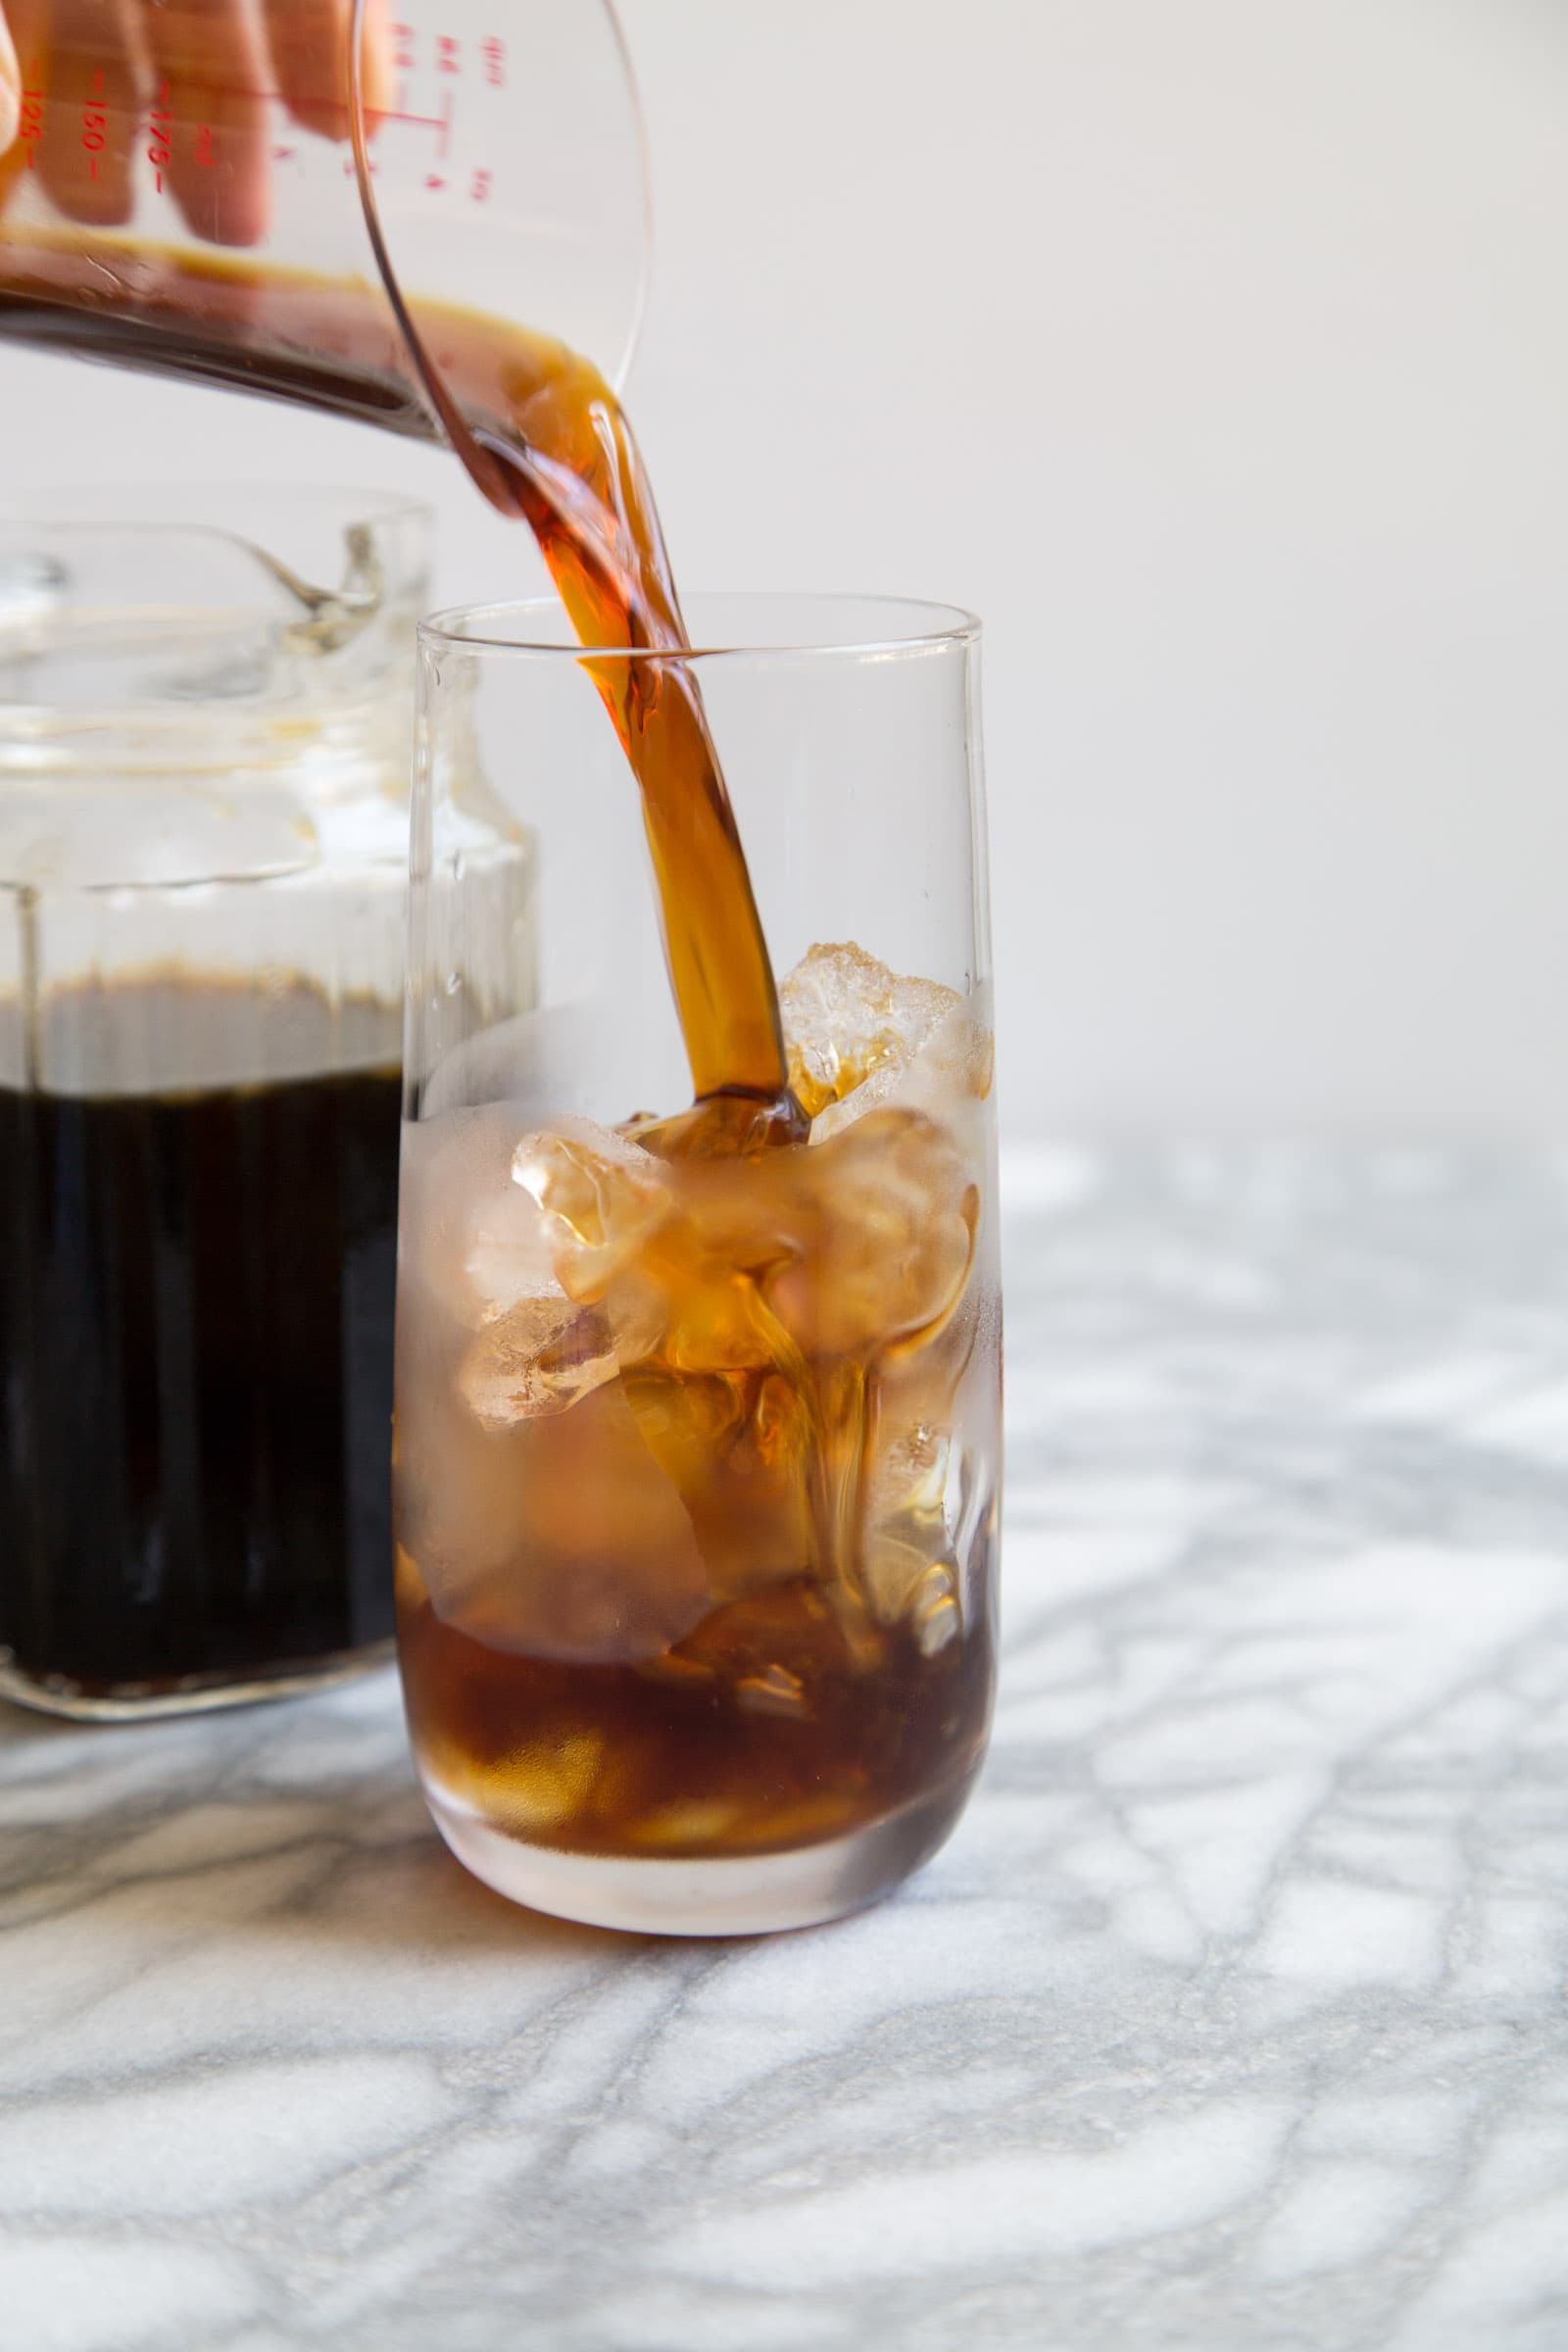 Homemade Cold Brew Coffee Concentrate